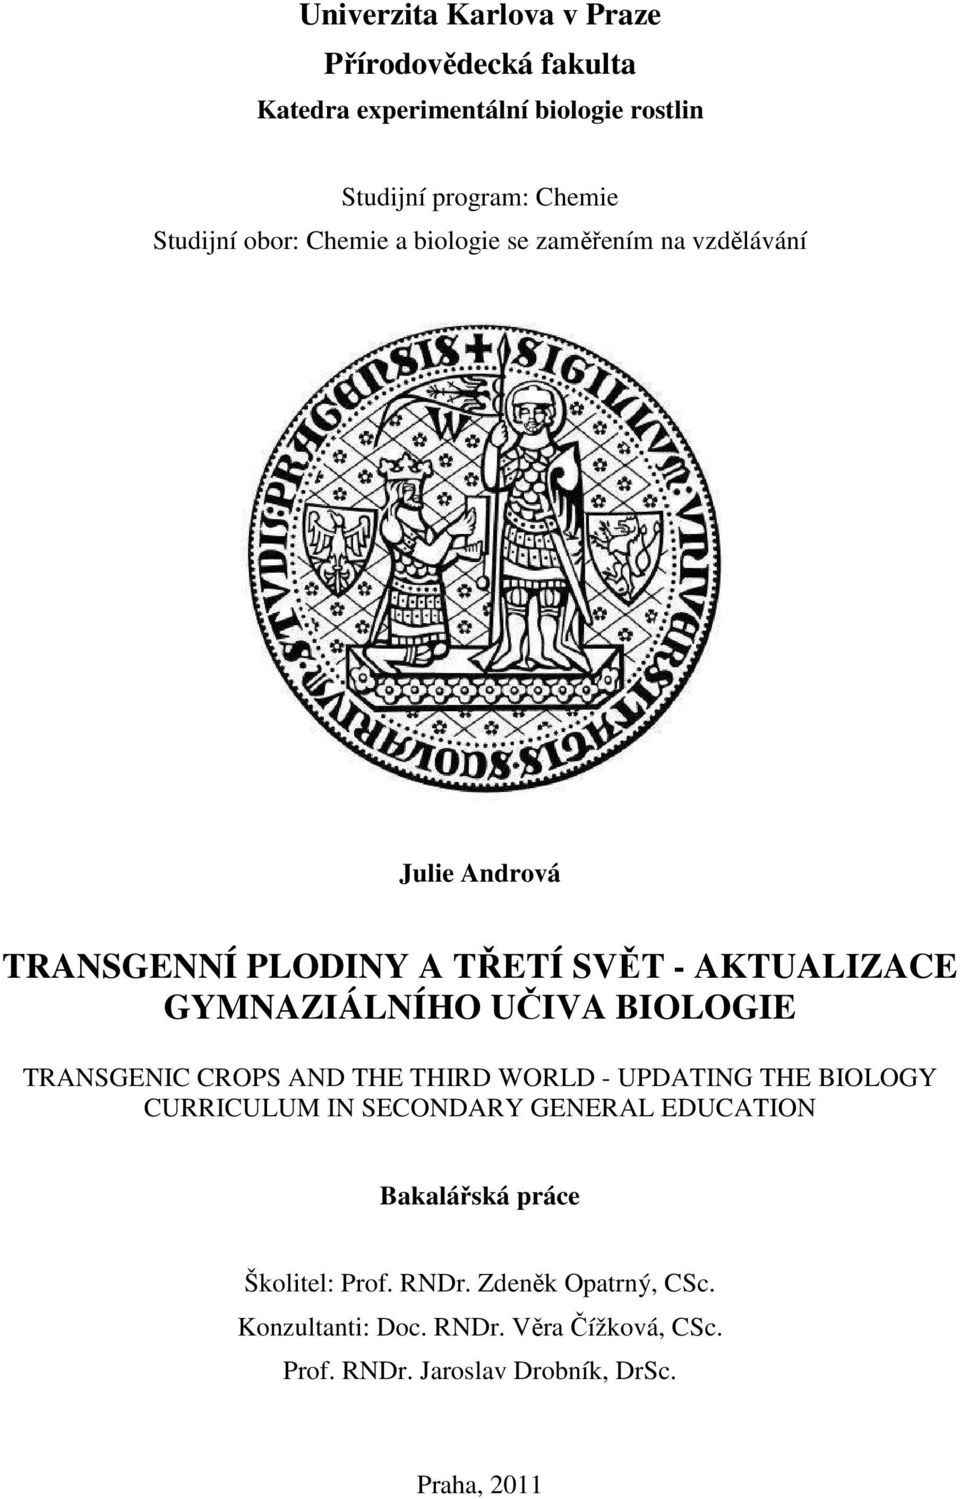 UČIVA BIOLOGIE TRANSGENIC CROPS AND THE THIRD WORLD - UPDATING THE BIOLOGY CURRICULUM IN SECONDARY GENERAL EDUCATION Bakalářská